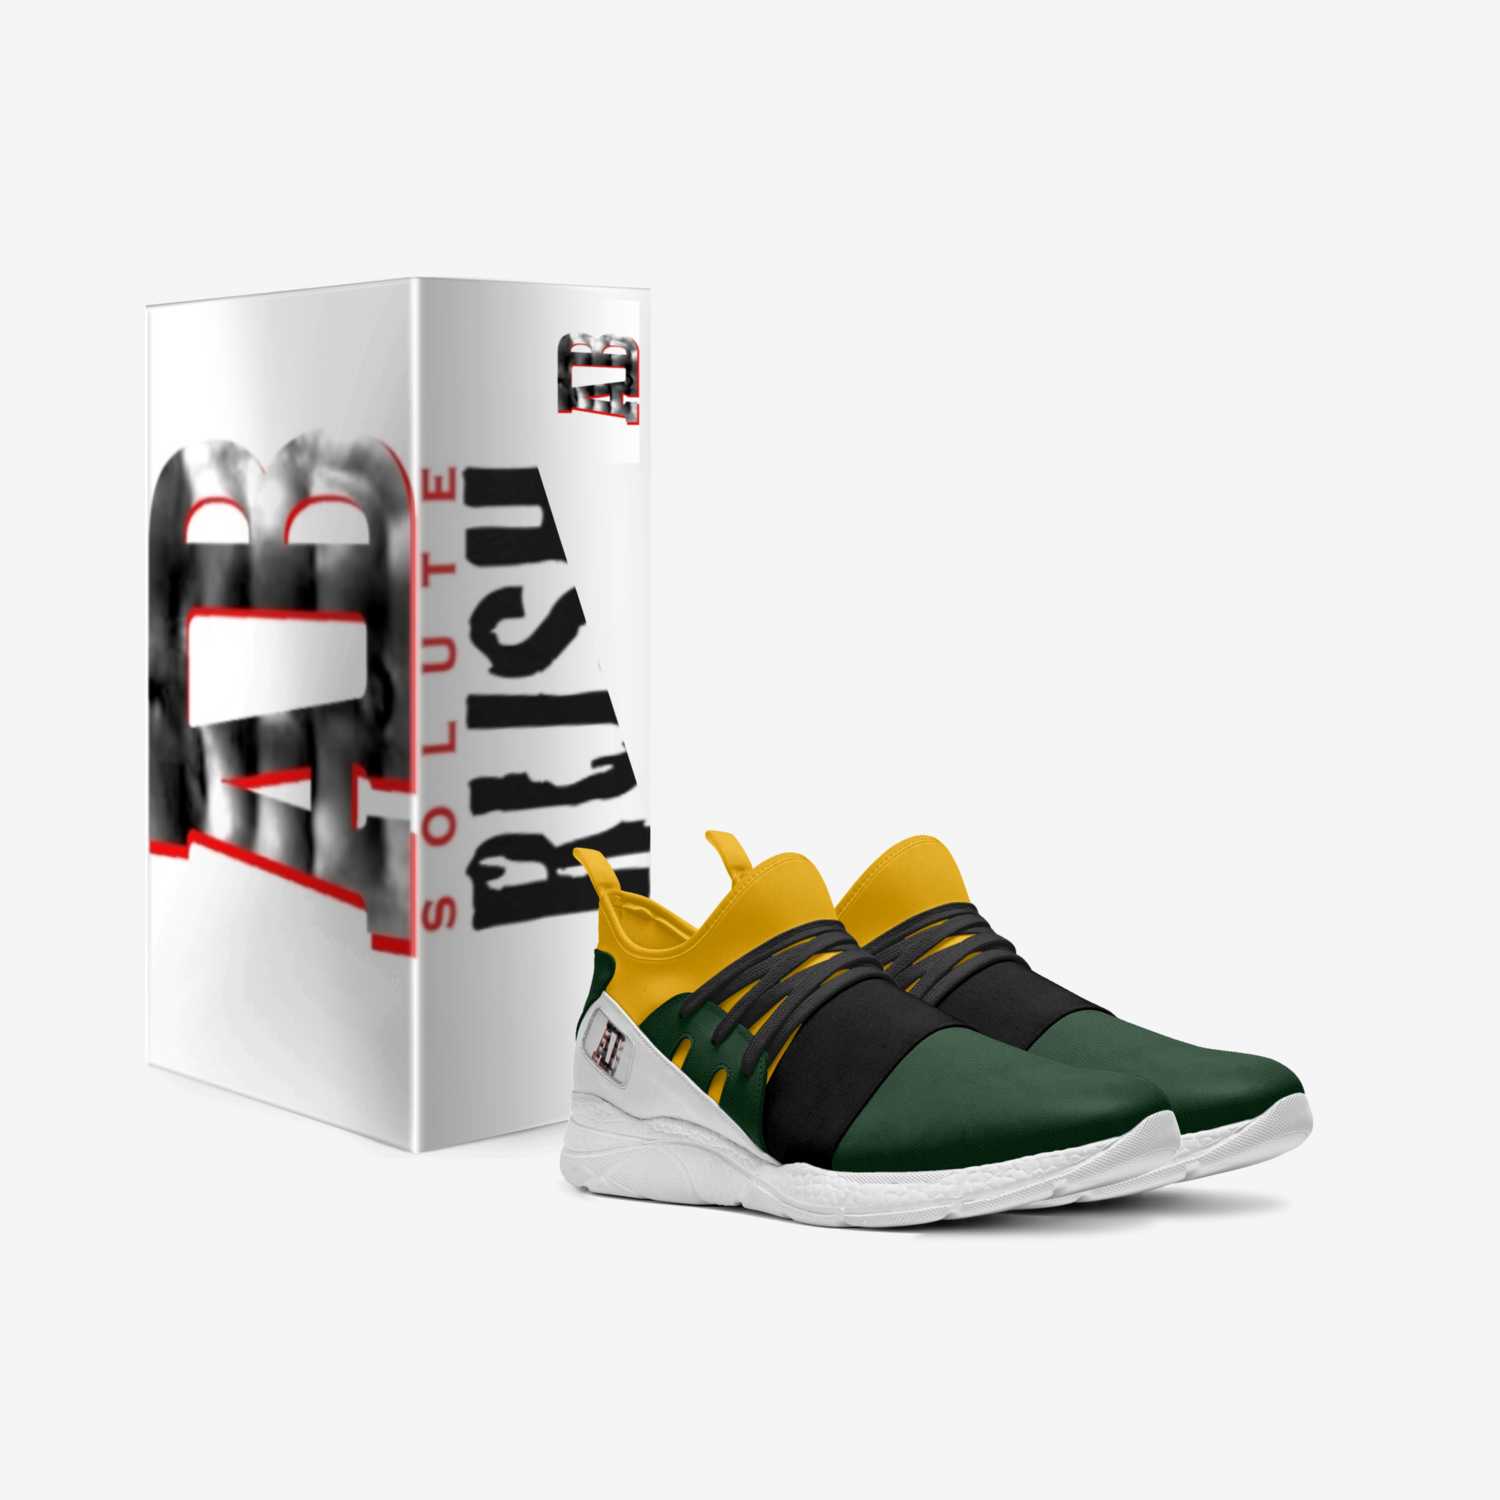 3D RUSH: Jamaica custom made in Italy shoes by Andrew Scott | Box view